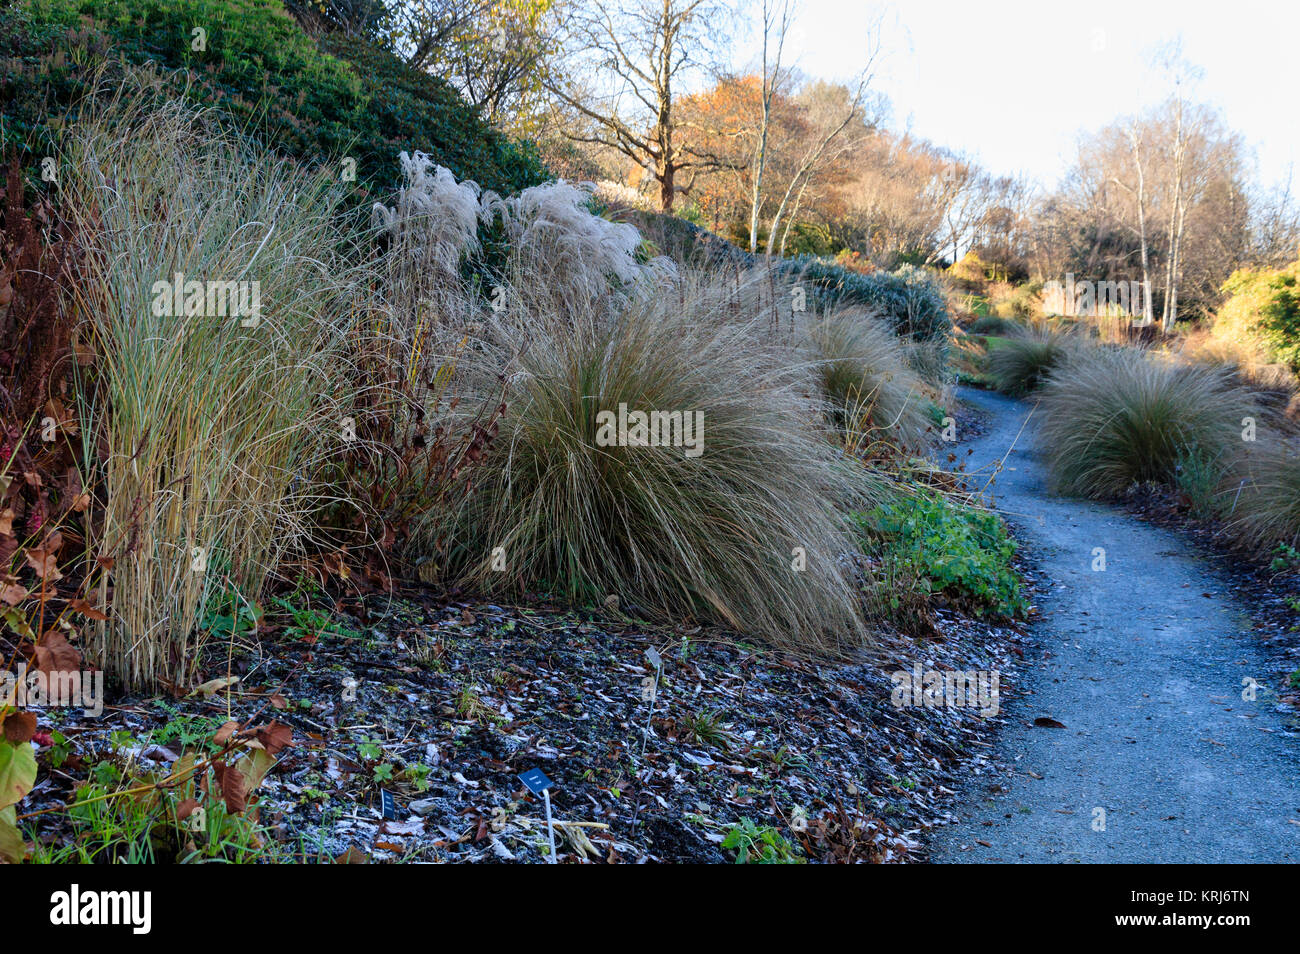 Arching stems of the red tussock grass, Chionochloa rubra, dominate a winter view at The Garden House, Buckland Monachorum, Devon, UK Stock Photo